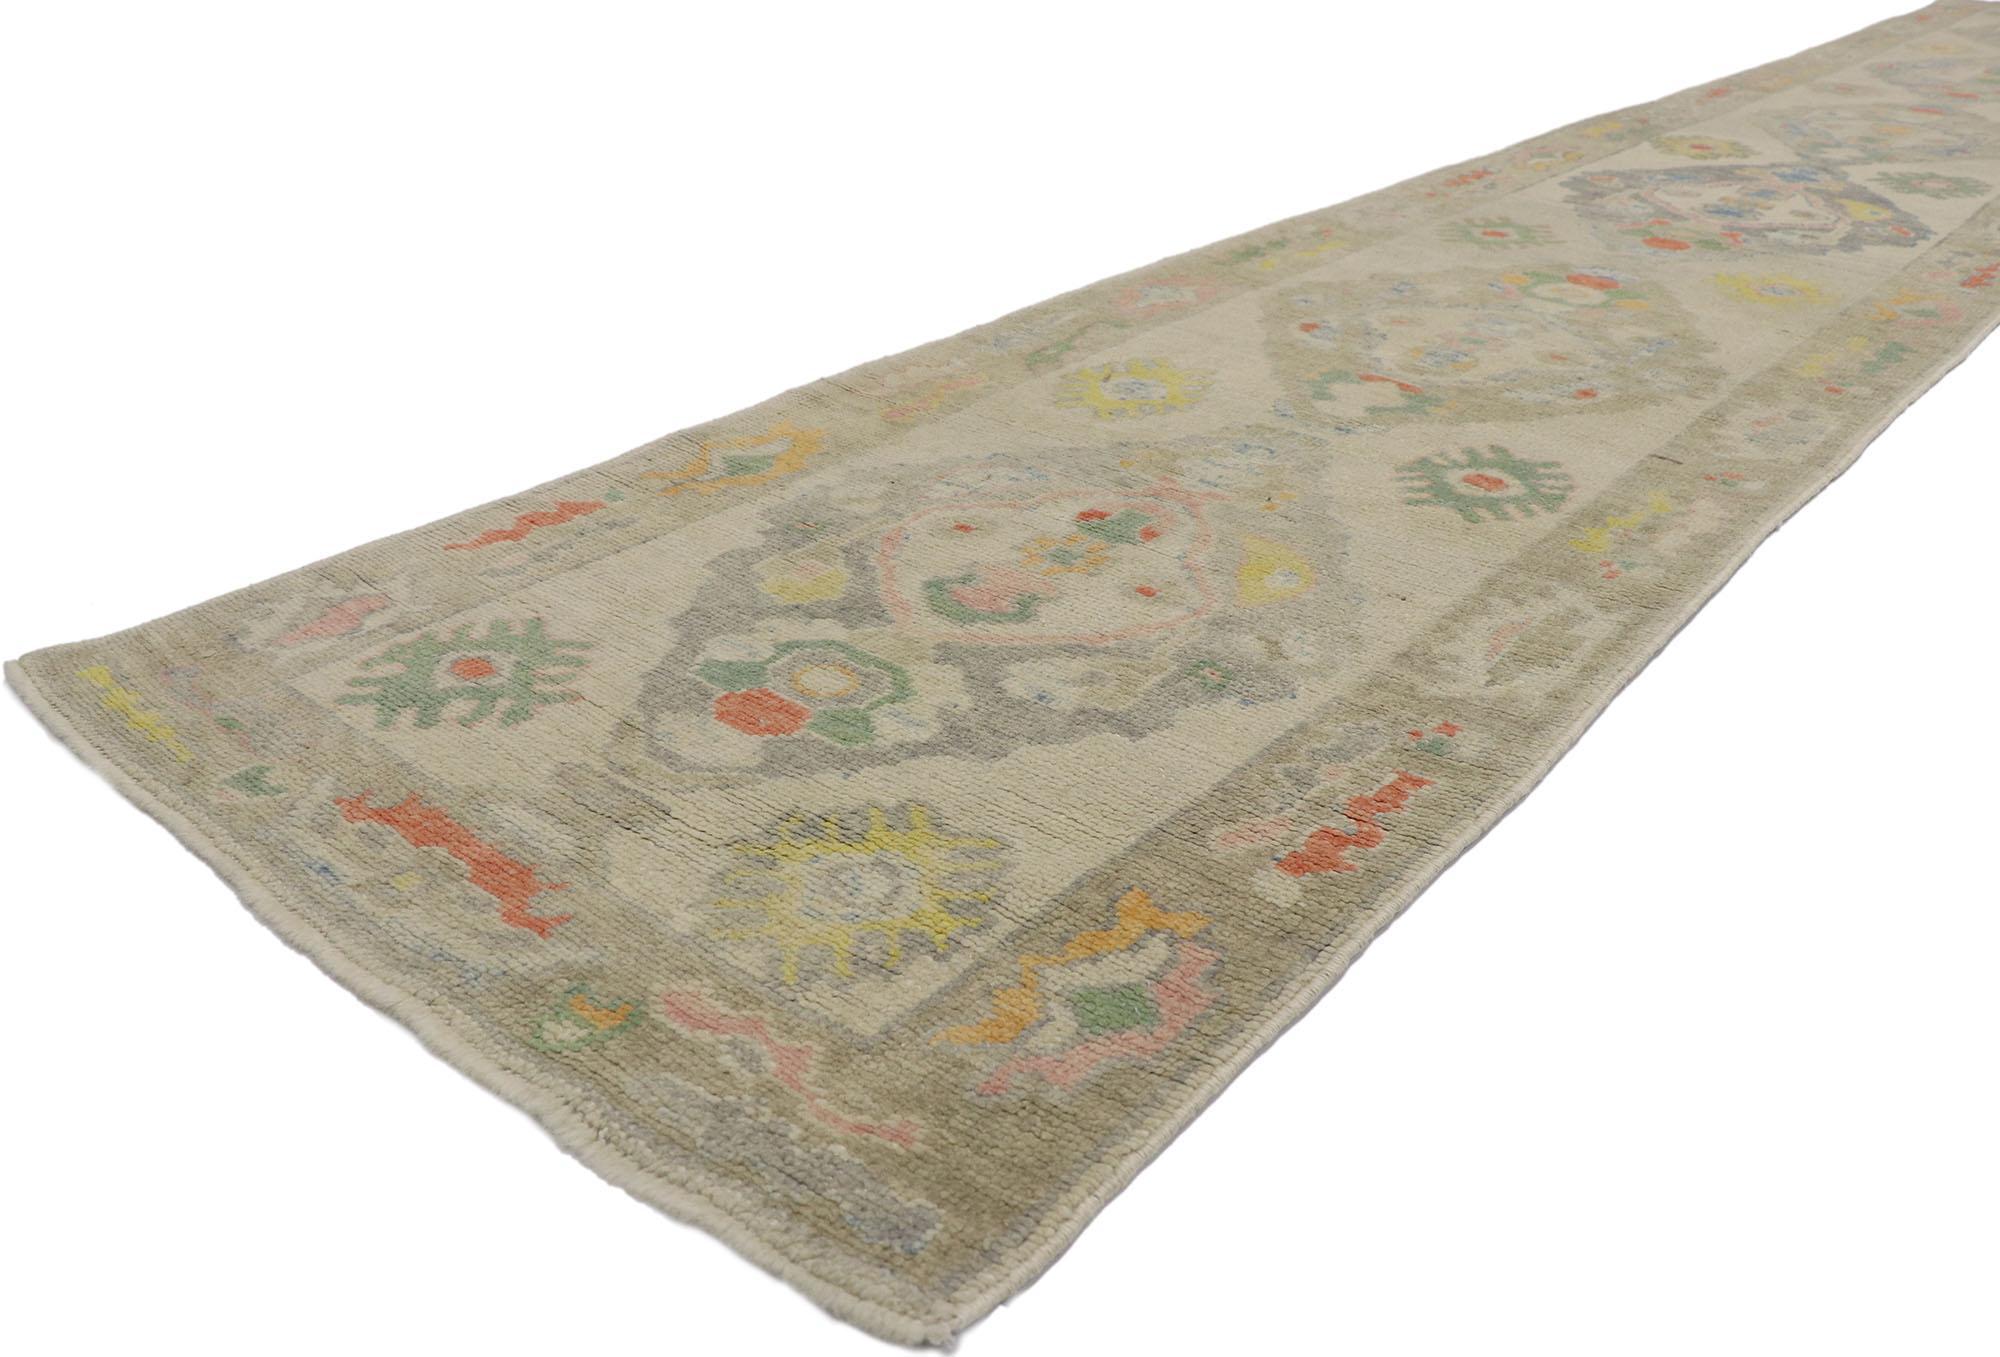 53591 New Contemporary Turkish Oushak runner with Modern style 02'10 x 17'10. This hand-knotted wool contemporary Turkish Oushak runner features an all-over botanical pattern spread across an abrashed sandy-beige striated field. An array of